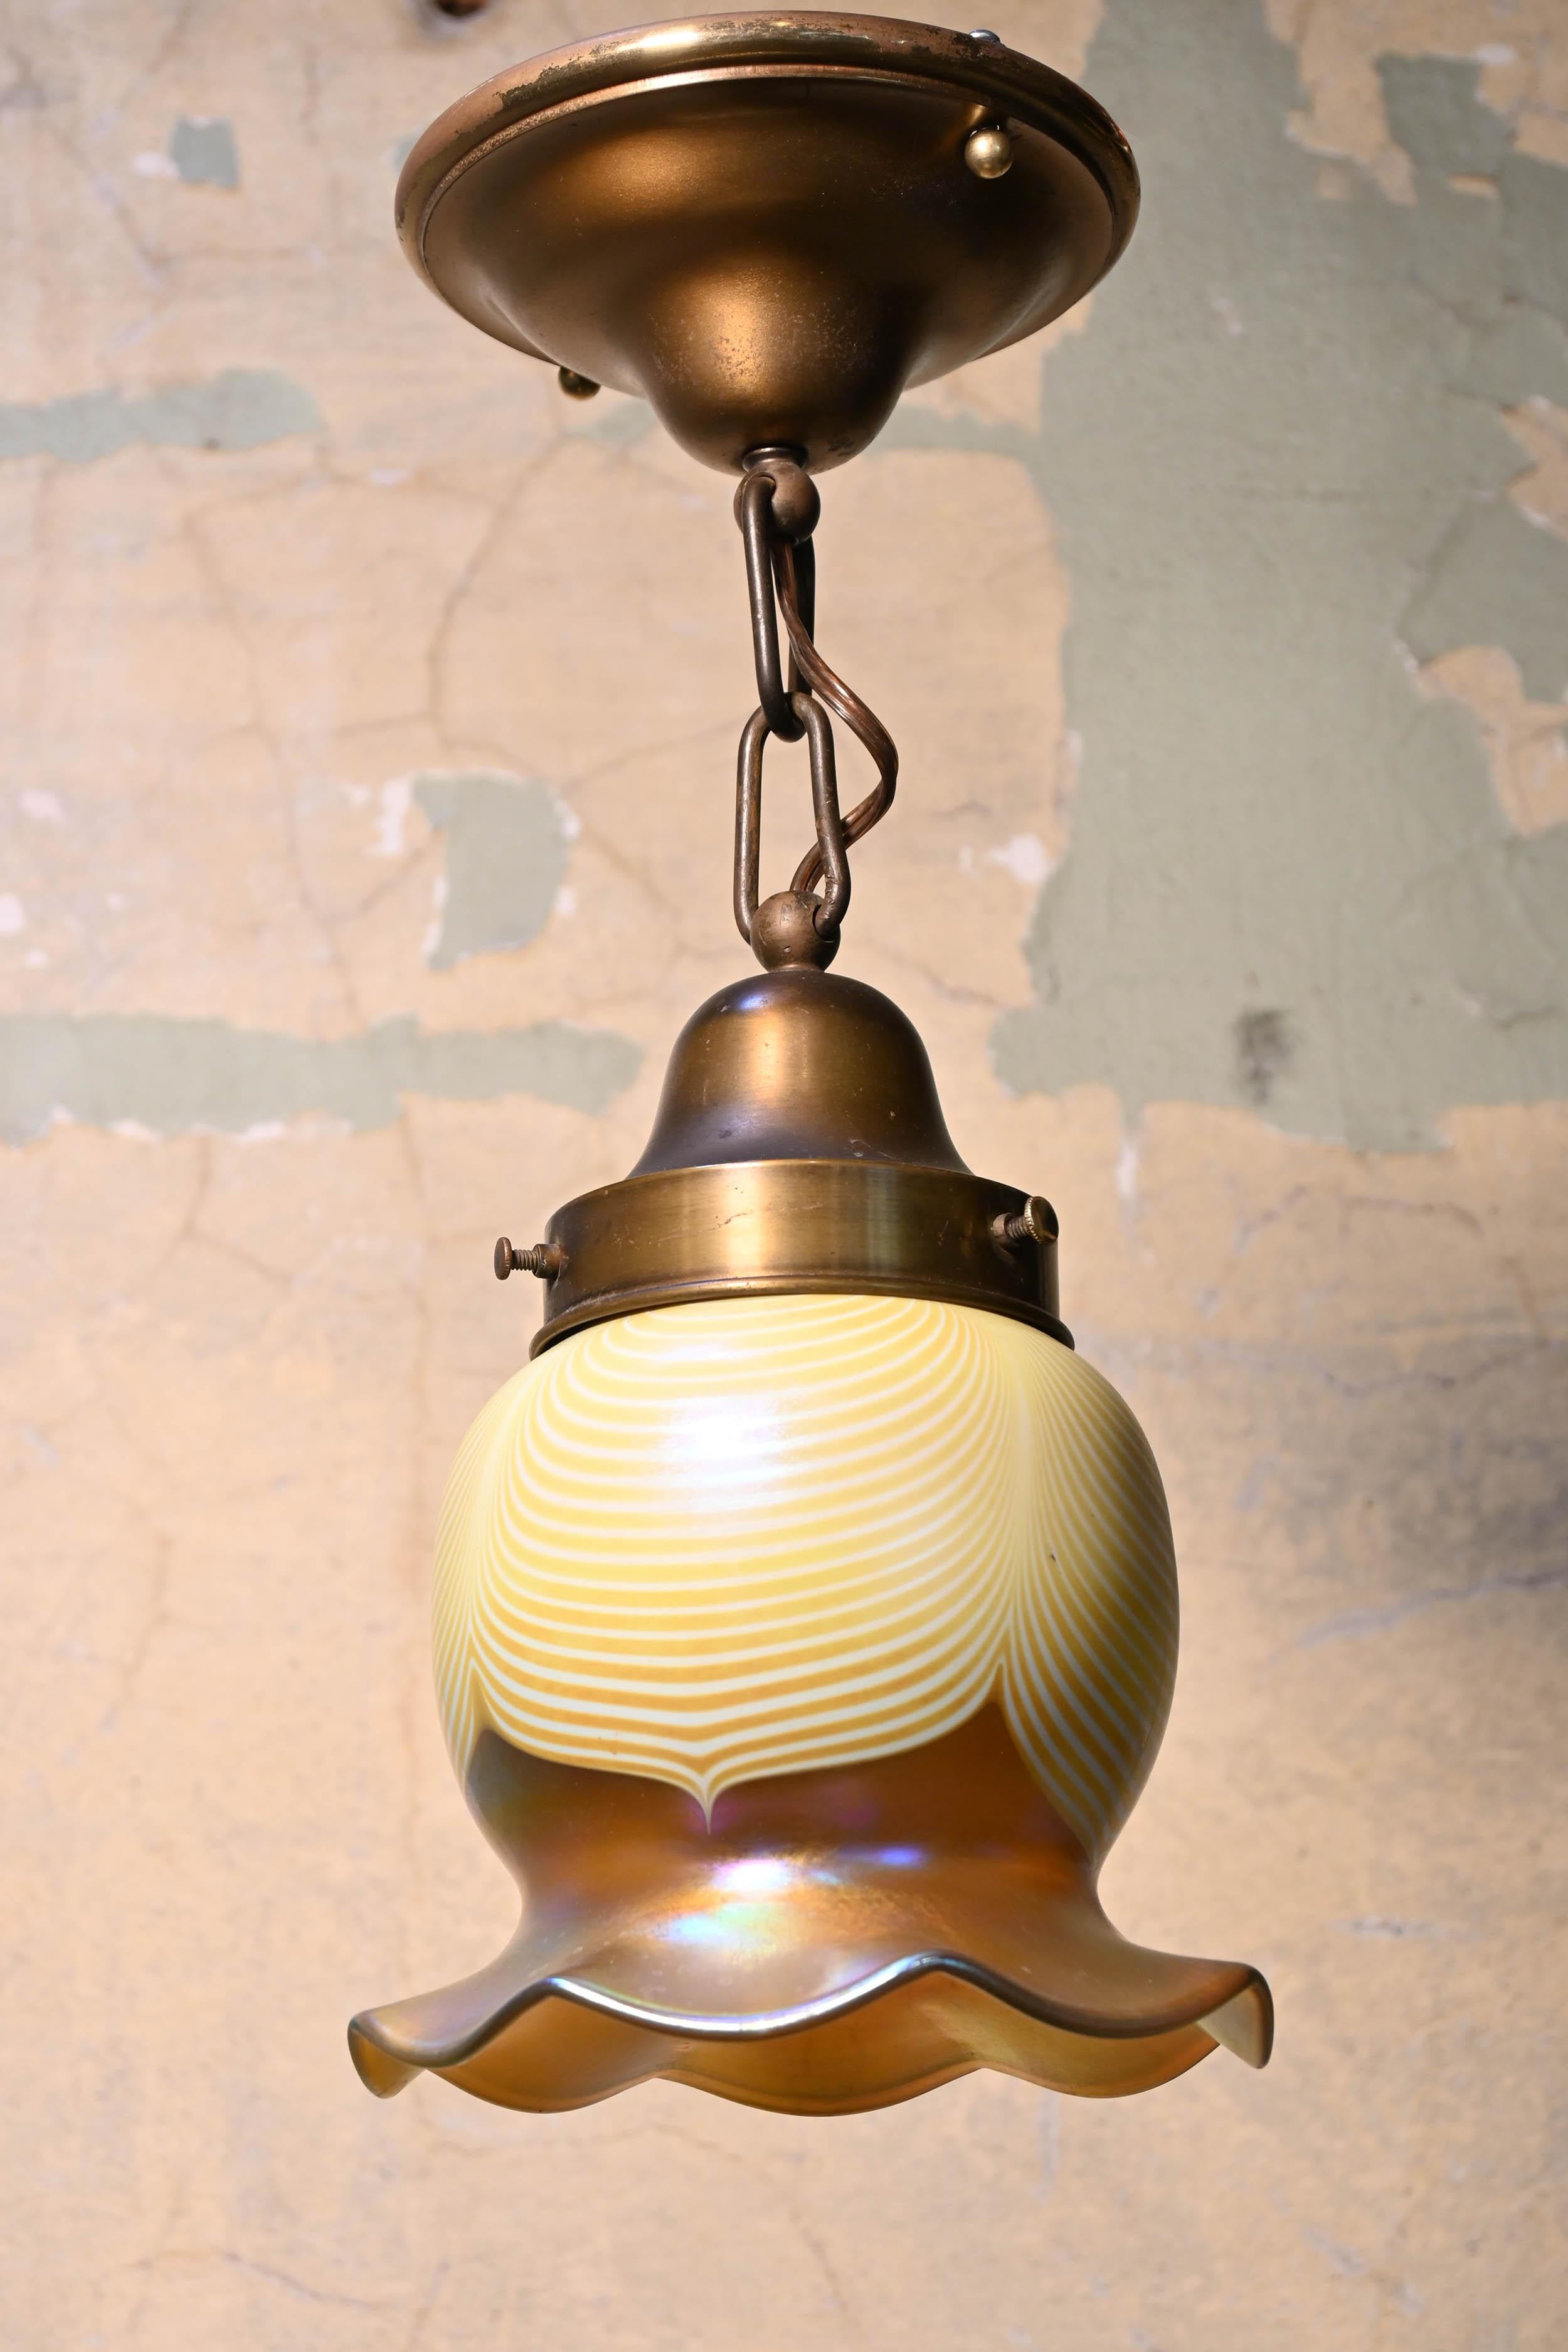 This shade is of the pulled feather variety. Cream and yellow feathered layers reach down to the multi-colored glass of the skirted rim. This fixture is larger than most with 3” fitter size. Paired with a simple brass fixture, the shade is the